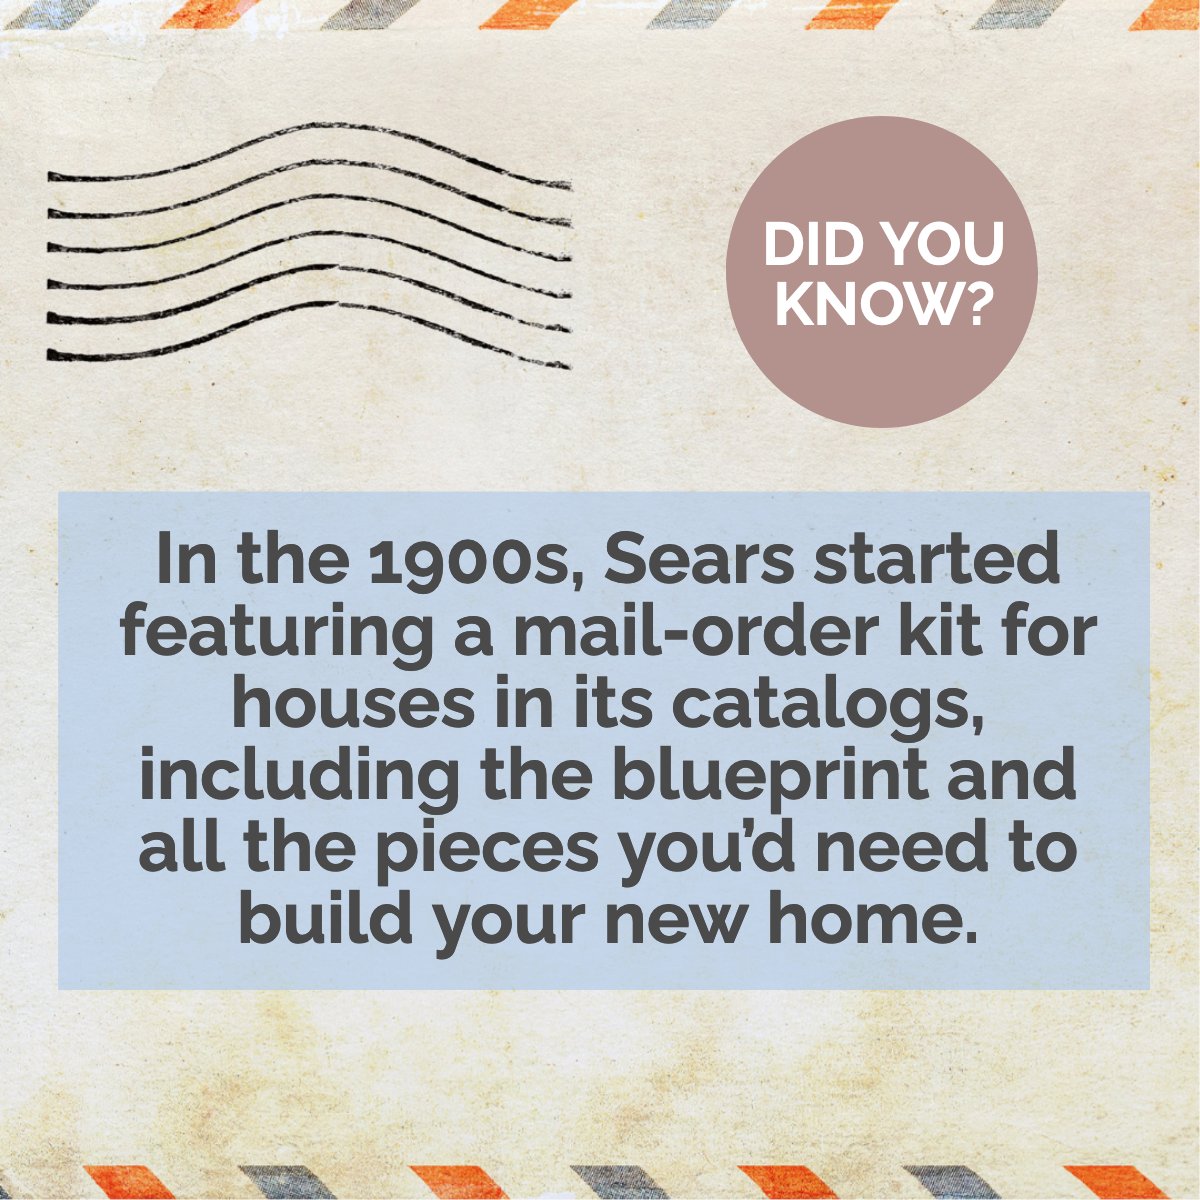 Did you know?

The house that came in the mail.
✉️📬🏡

#didyouknow #fact #1900s  #mail #goodtoknow #randomfact #realestate #realestate101
 #AndreaDavis